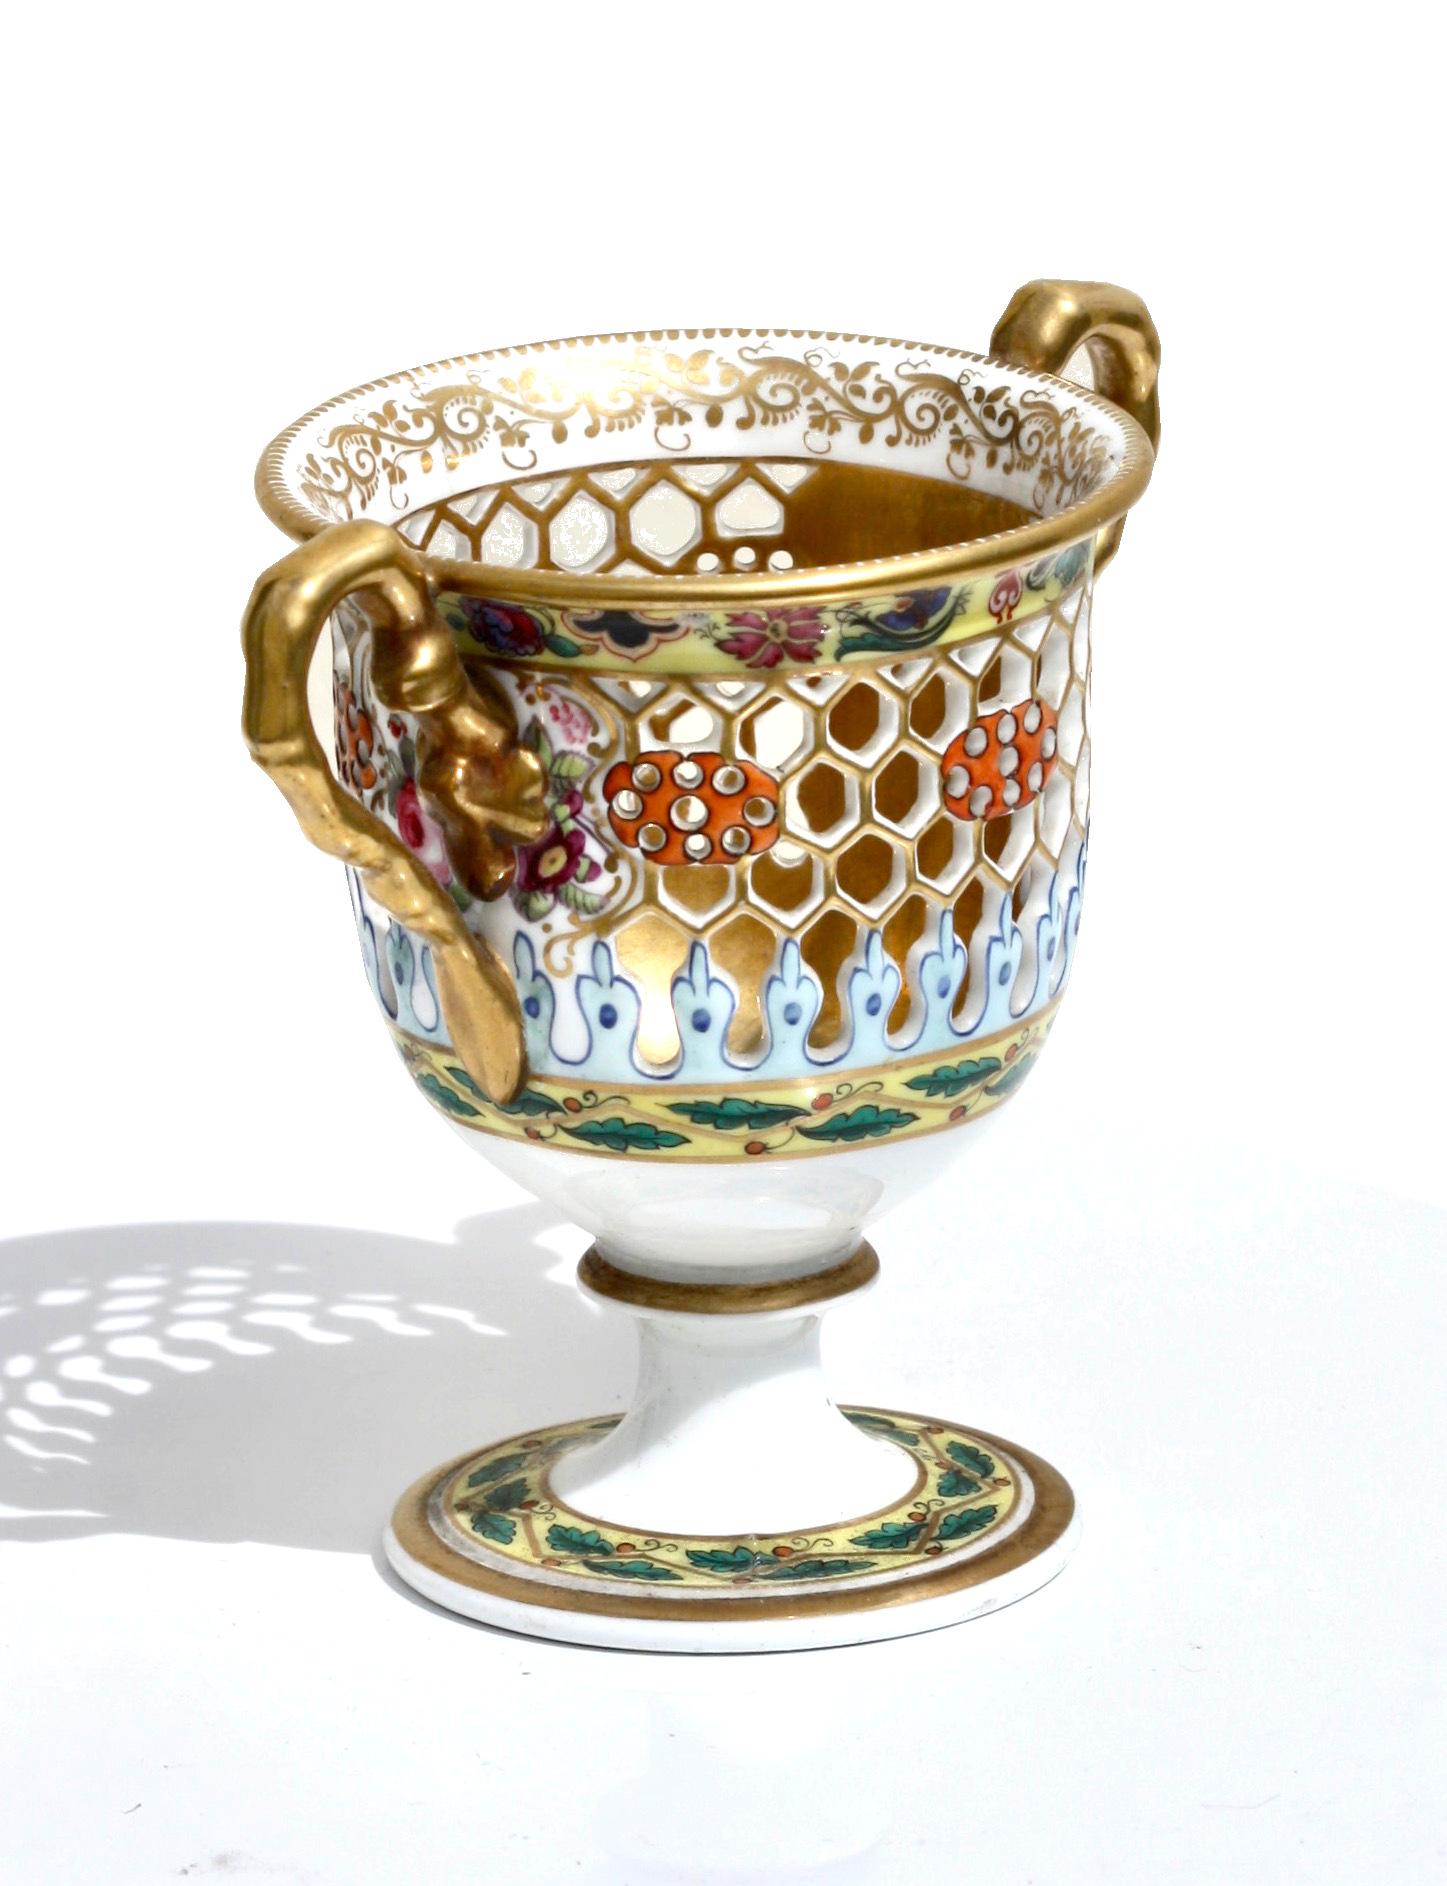 A fine Chamberlains Worcester reticulated porcelain cup, 
English, 1847-1850. 
Printed factory mark, of urn form with branch shaped handles, raised on a pedestal base. 
Measures: Height 3.87 in. (9.84 cm.), 
Width 4.25 in. (10.79 cm.).
   